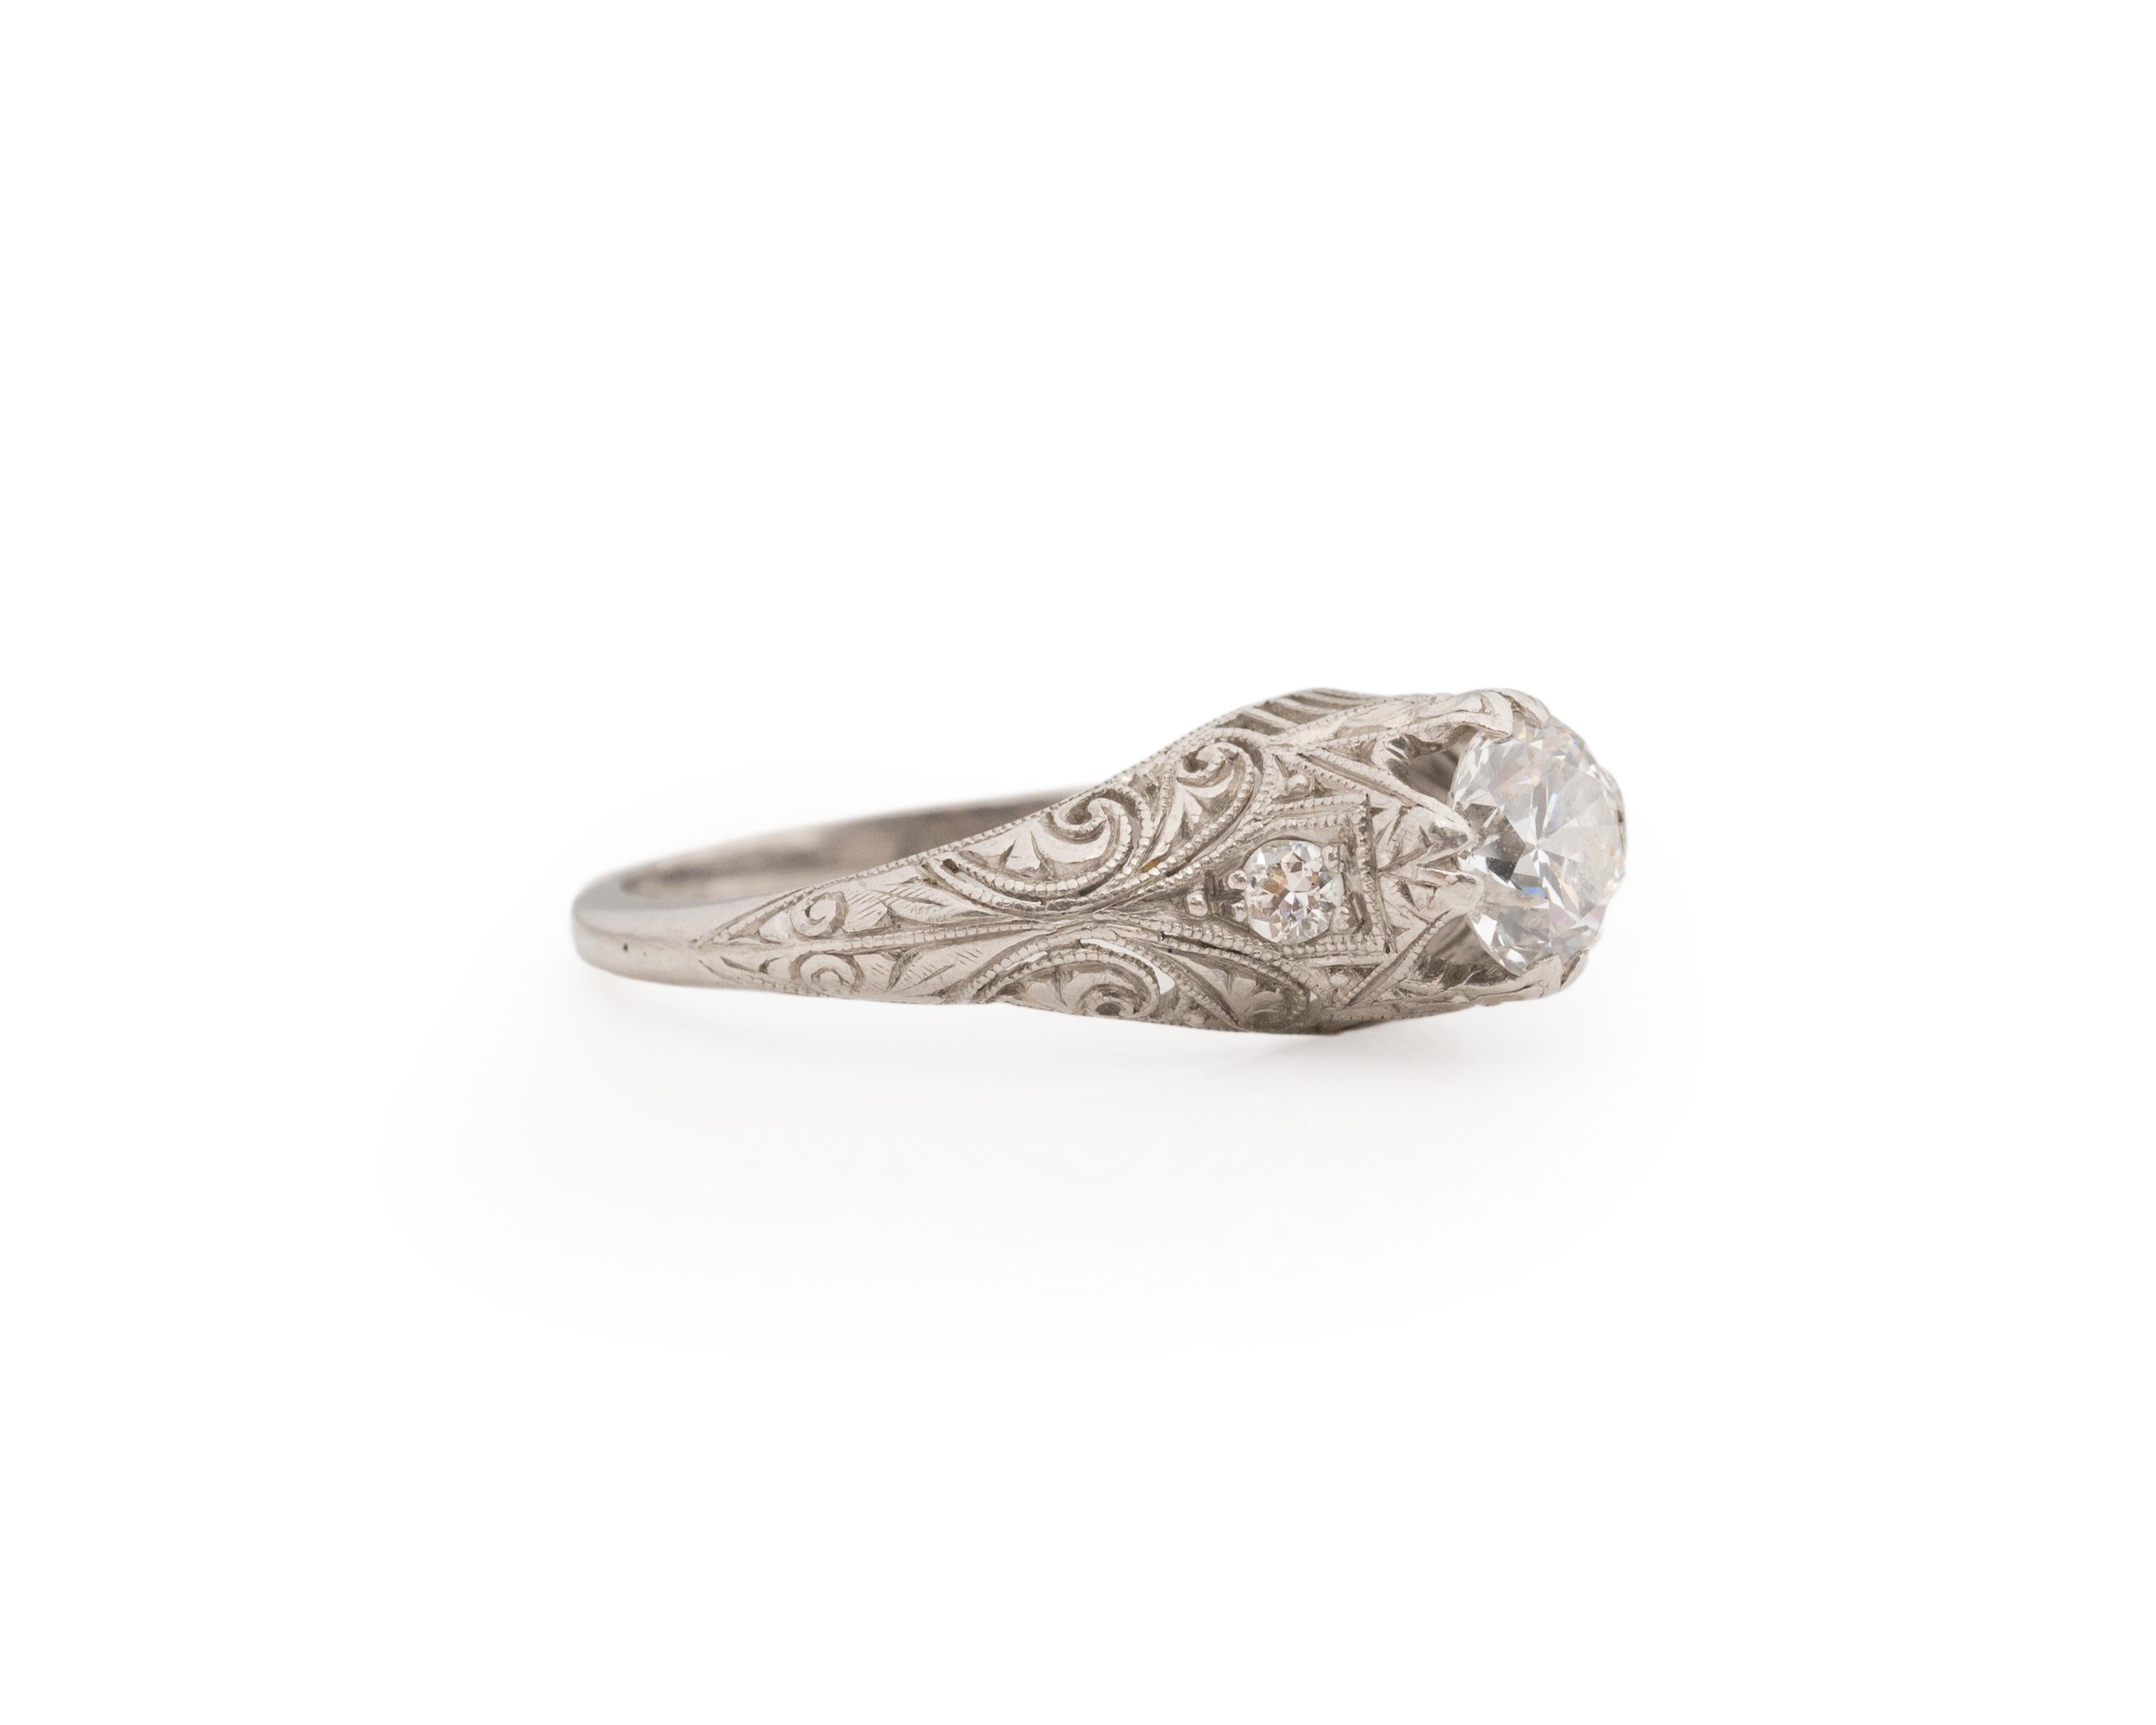 Year: 1920s

Item Details:
Ring Size: 7.25
Metal Type: Platinum [Hallmarked, and Tested]
Weight: 4.2 grams

Diamond Details:
Weight: .90ct total weight
Cut: Old European brilliant
Color: F
Clarity: VS
Type: Natural

Finger to Top of Stone